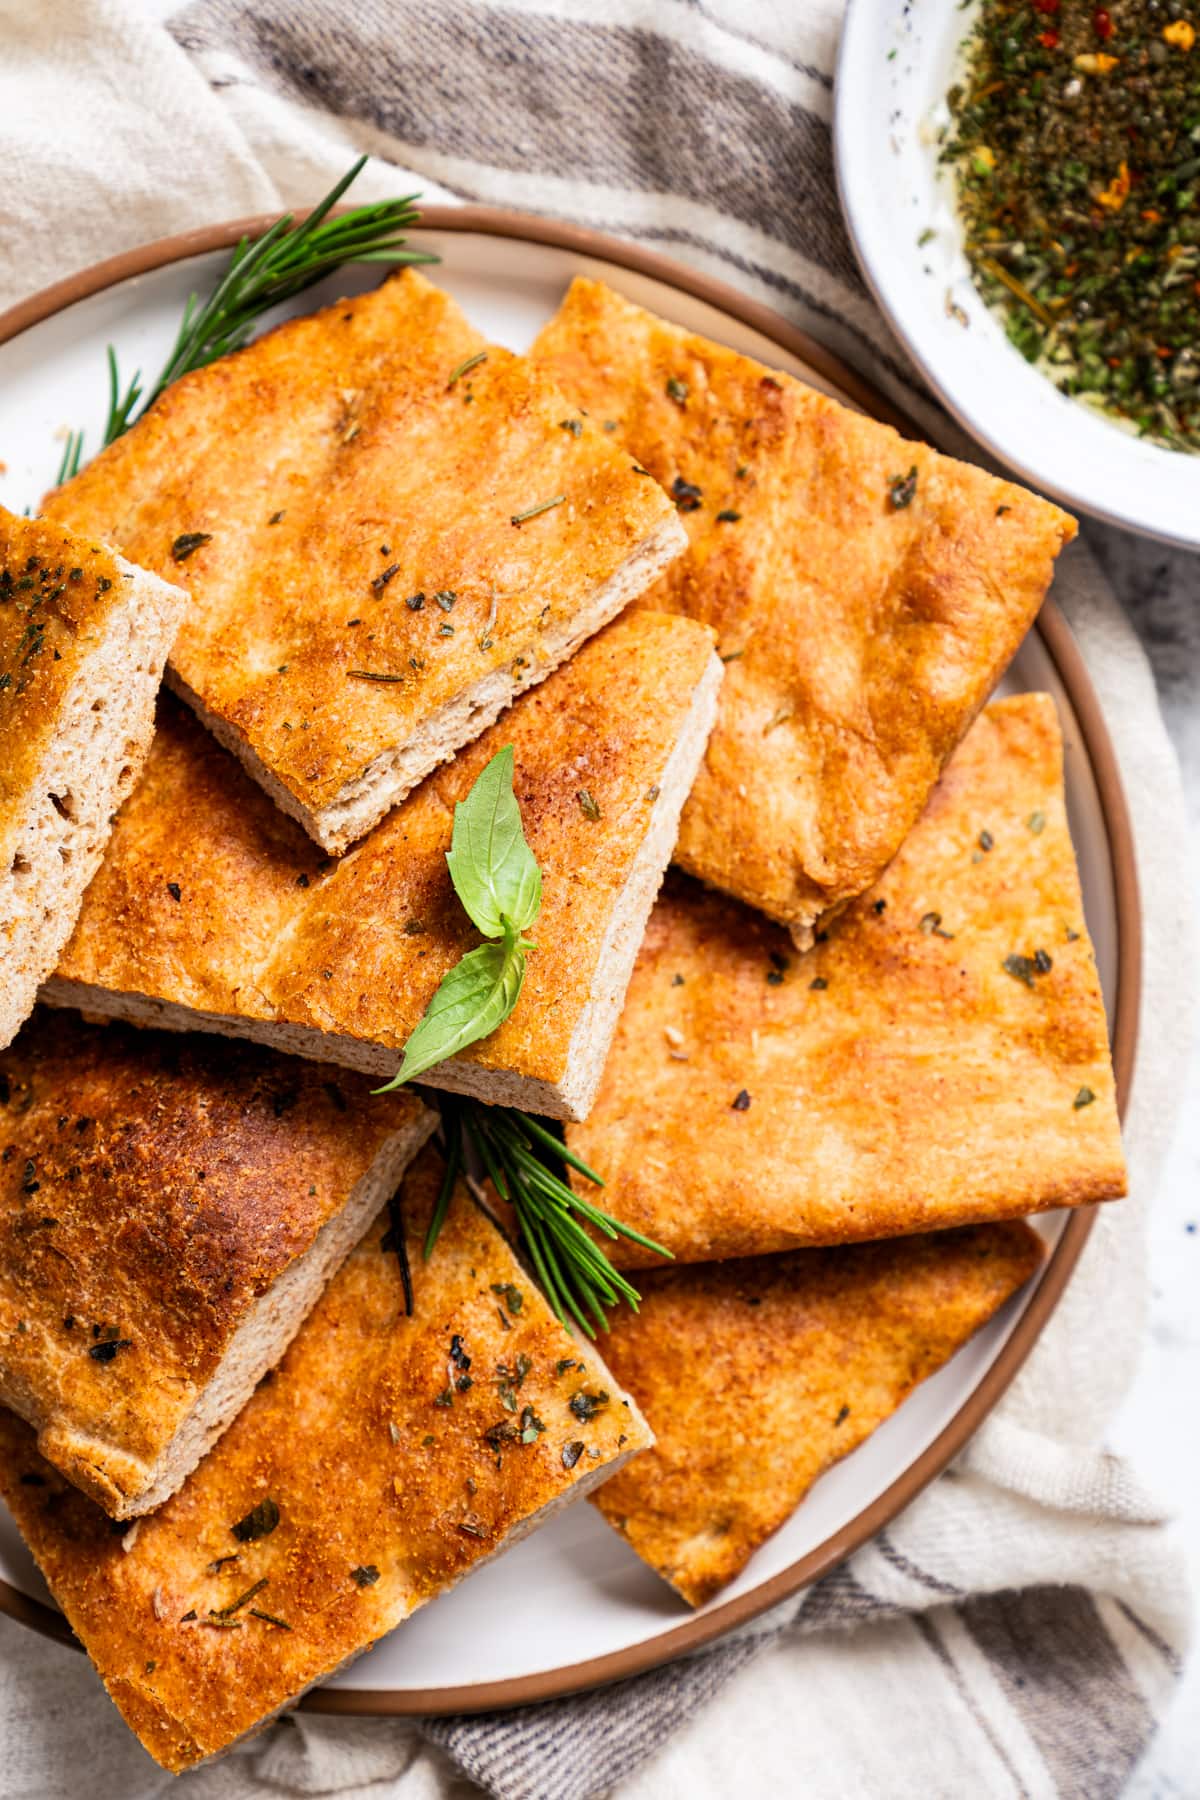 Slices of focaccia served on a plate.